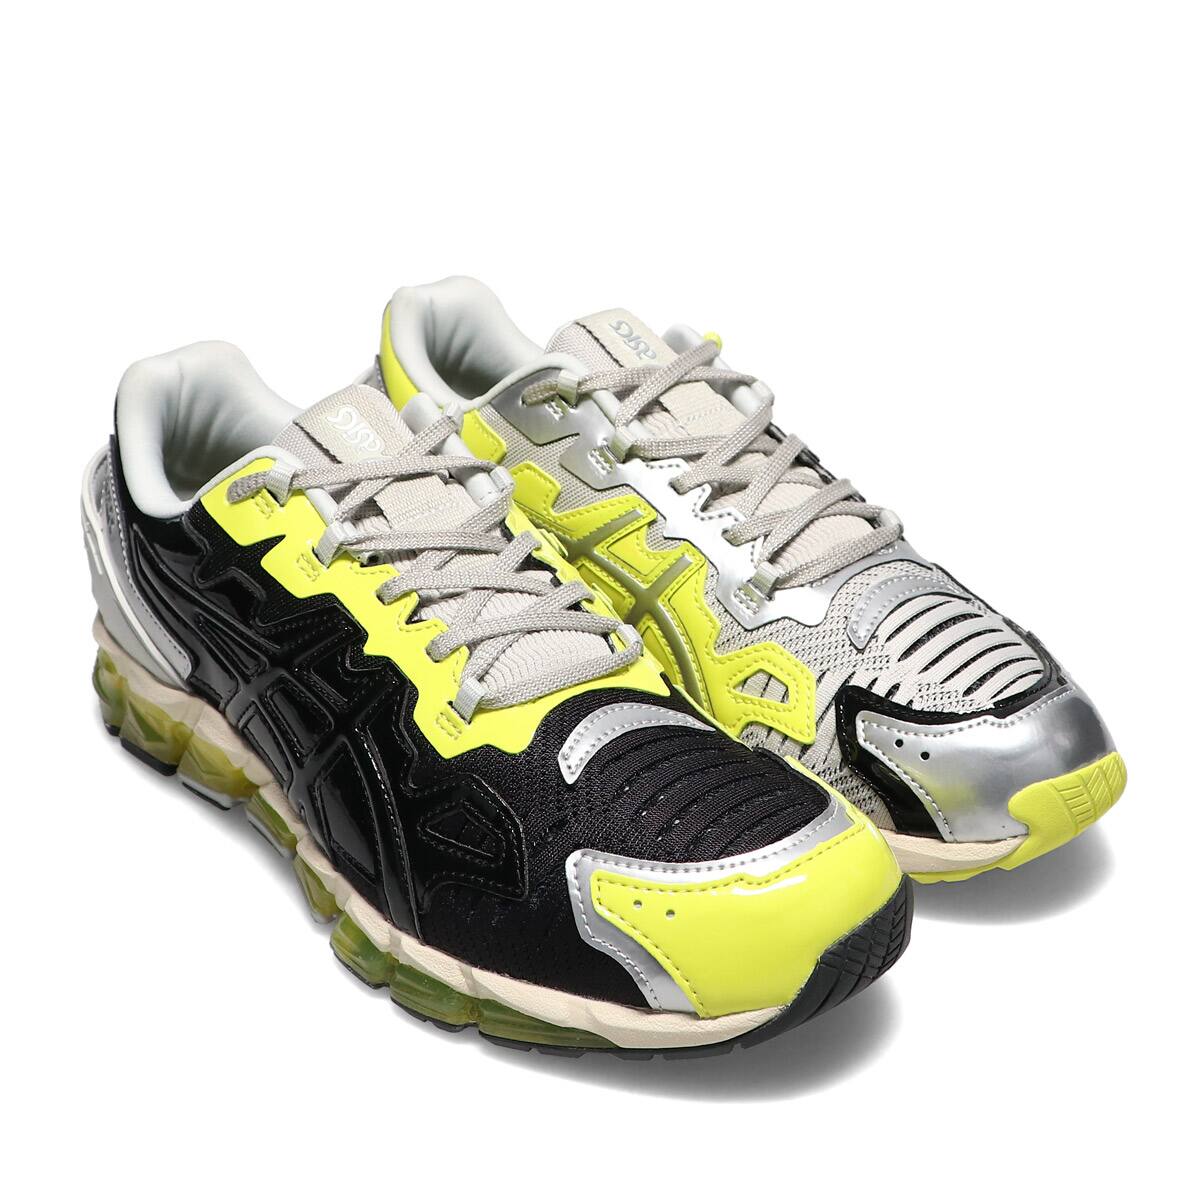 Baleen whale Eligibility By asics GEL-QUANTUM 360 6 GMBH PURE SILVER/SOUR YUZU 22SS-I